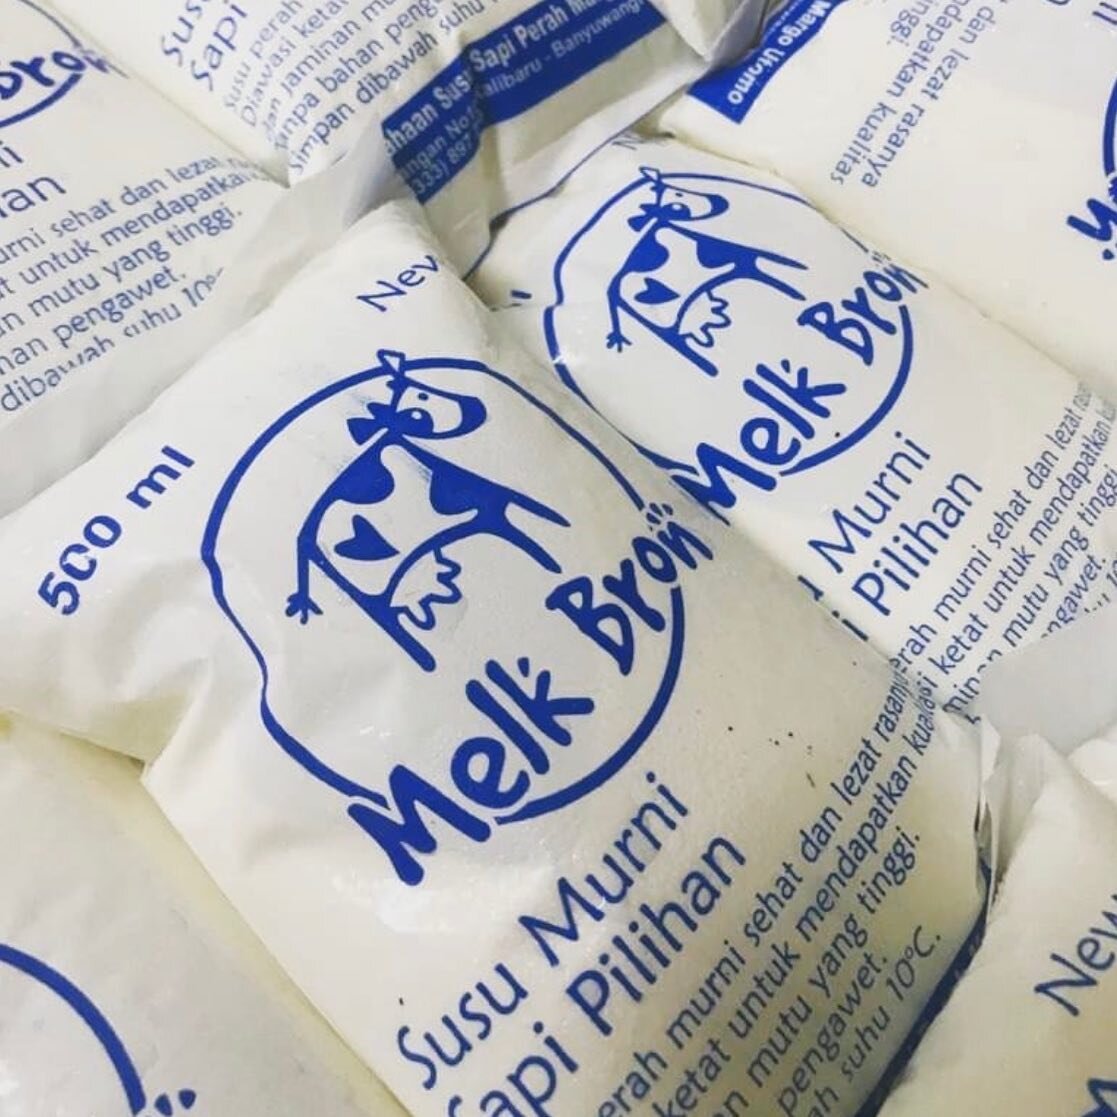 Get your fresh milk from our dairy farm. Order now! 🐮